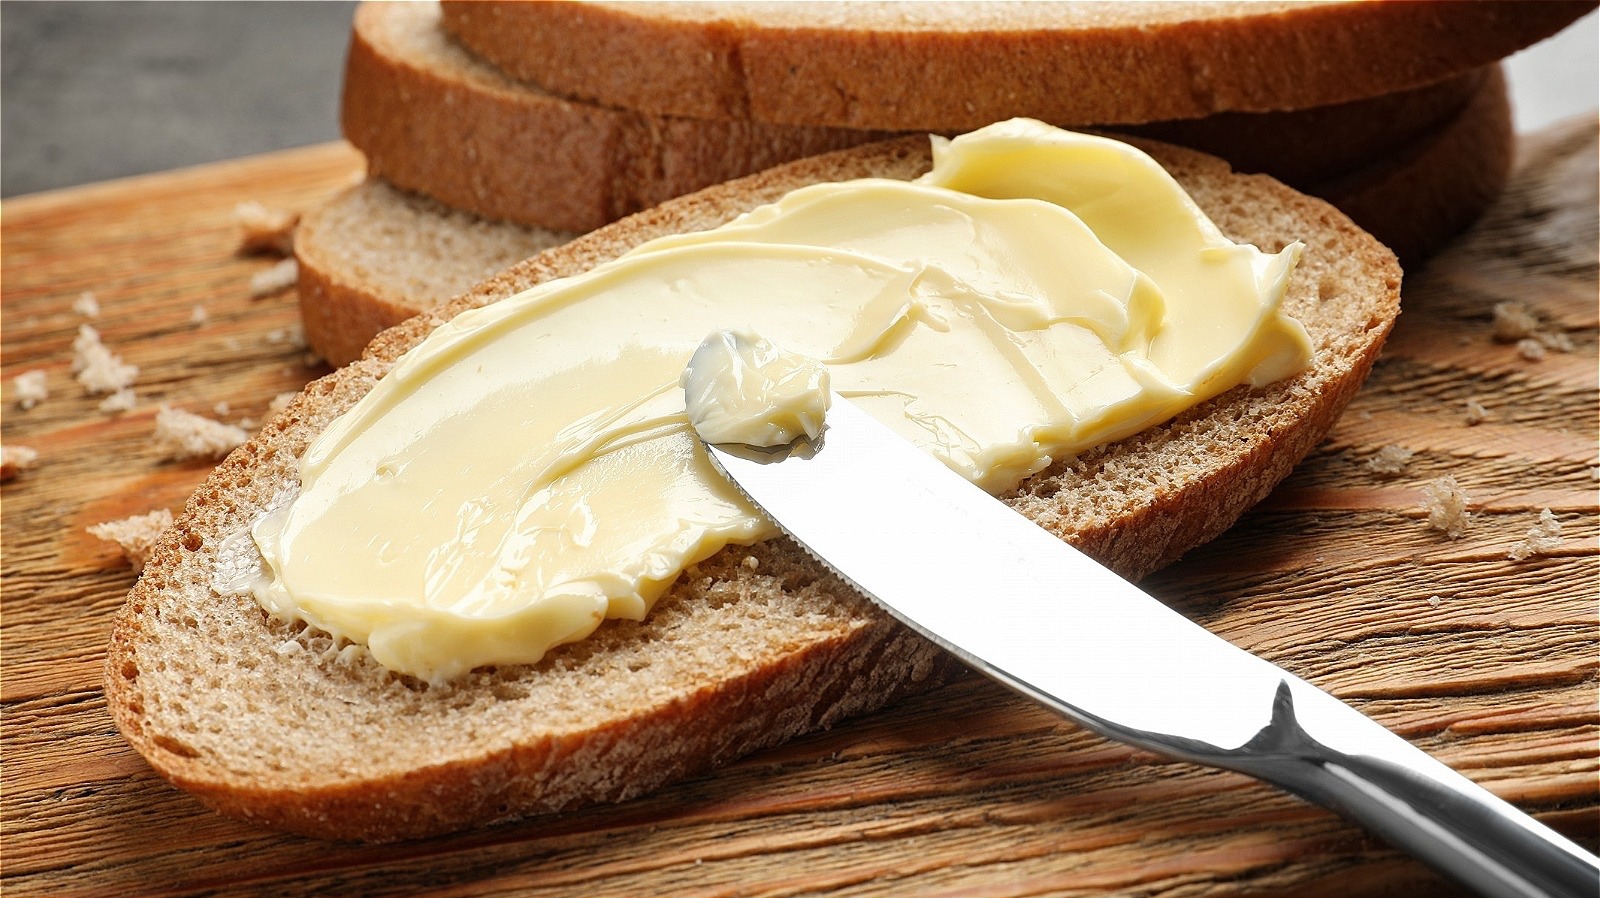 You Should Butter Your Bread Before Toasting, But There's A Catch